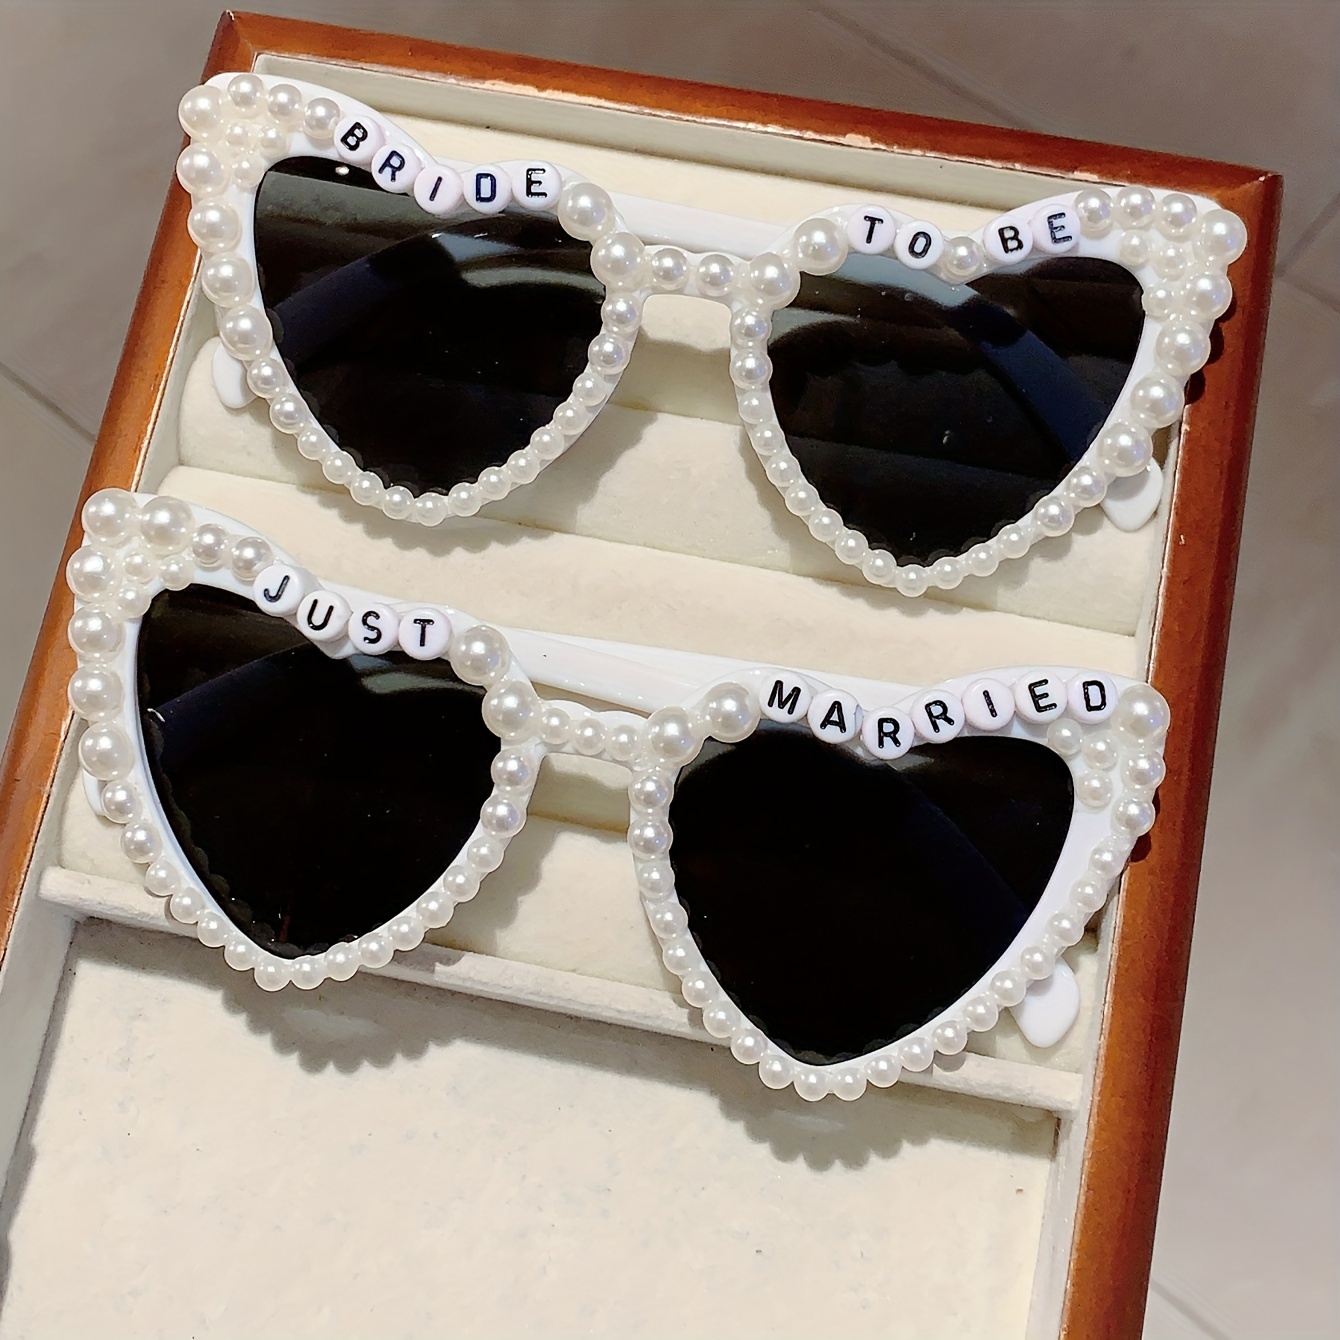 

Heart-shaped Glasses For Women, Oversized Fashion Wedding Style With Faux Pearl Decoration, Polycarbonate Lenses, Hiking Glasses With 'bride To Be' And 'just Married' Letter Decorations, Black